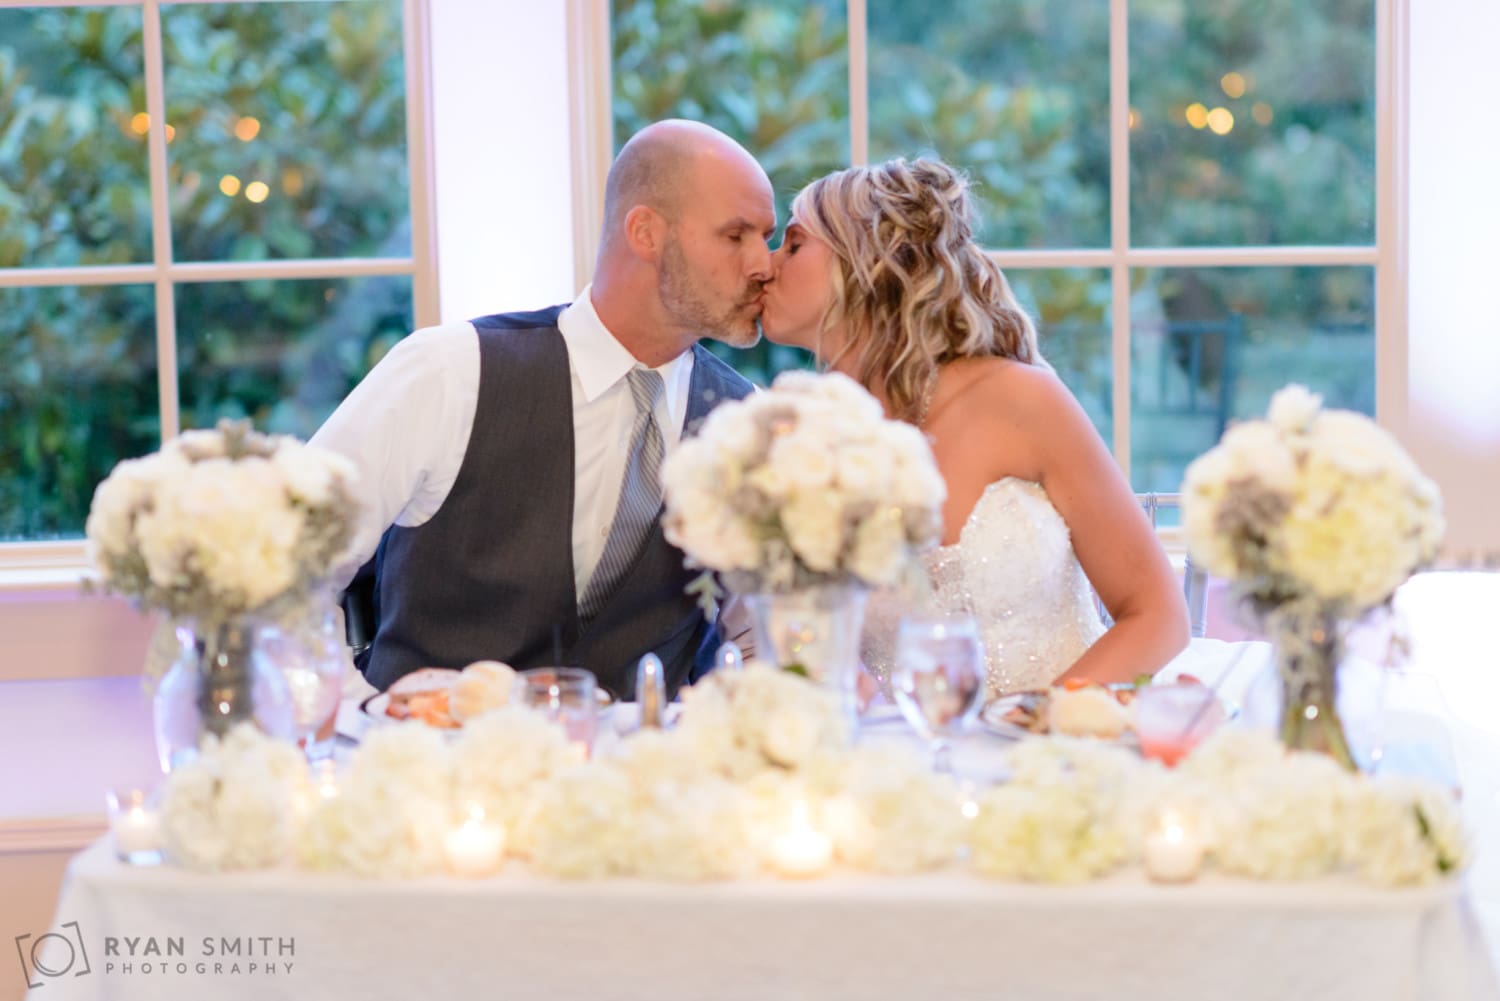 Kiss at the sweetheart table -